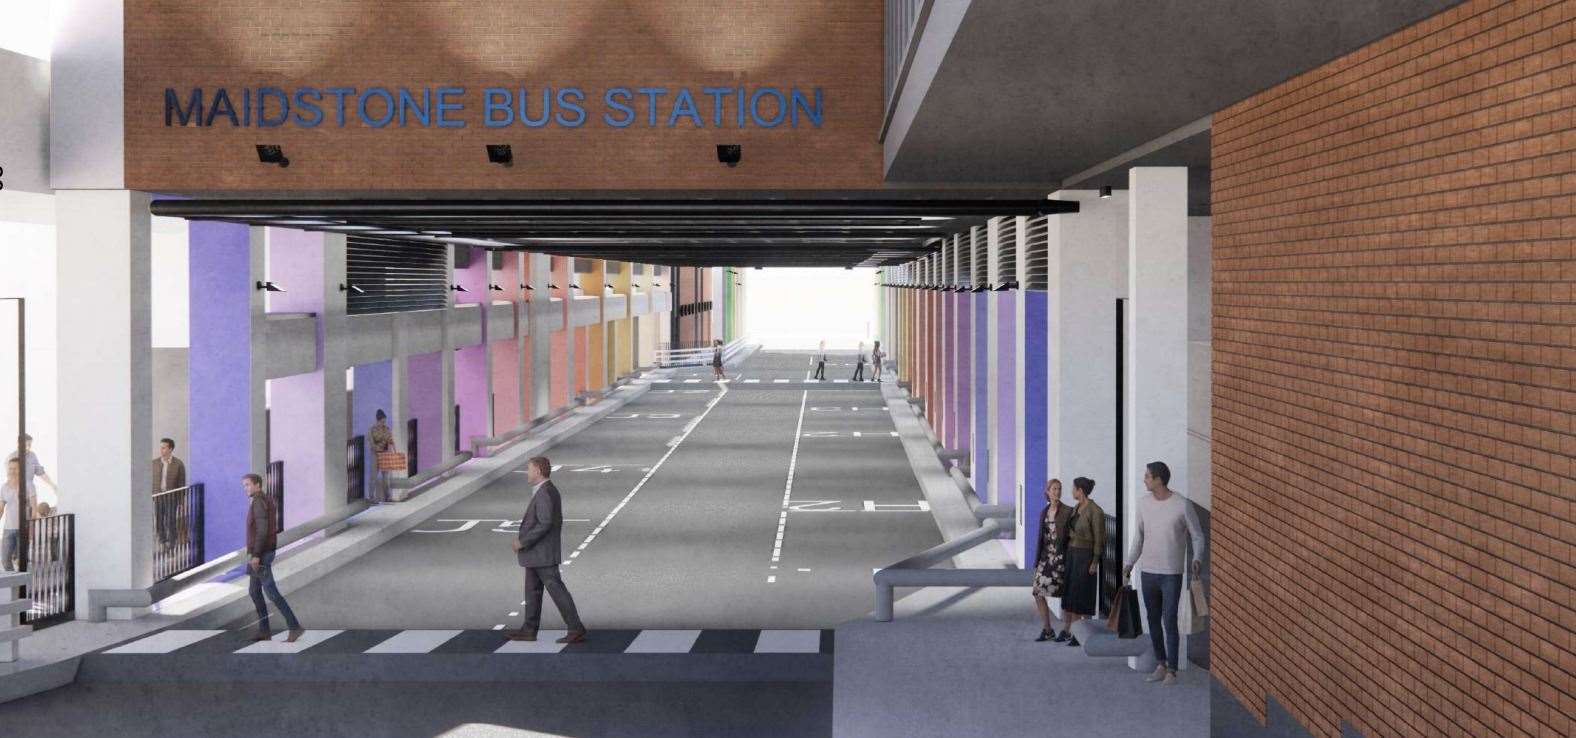 New artists impressions show what Maidstone bus station could soon look like